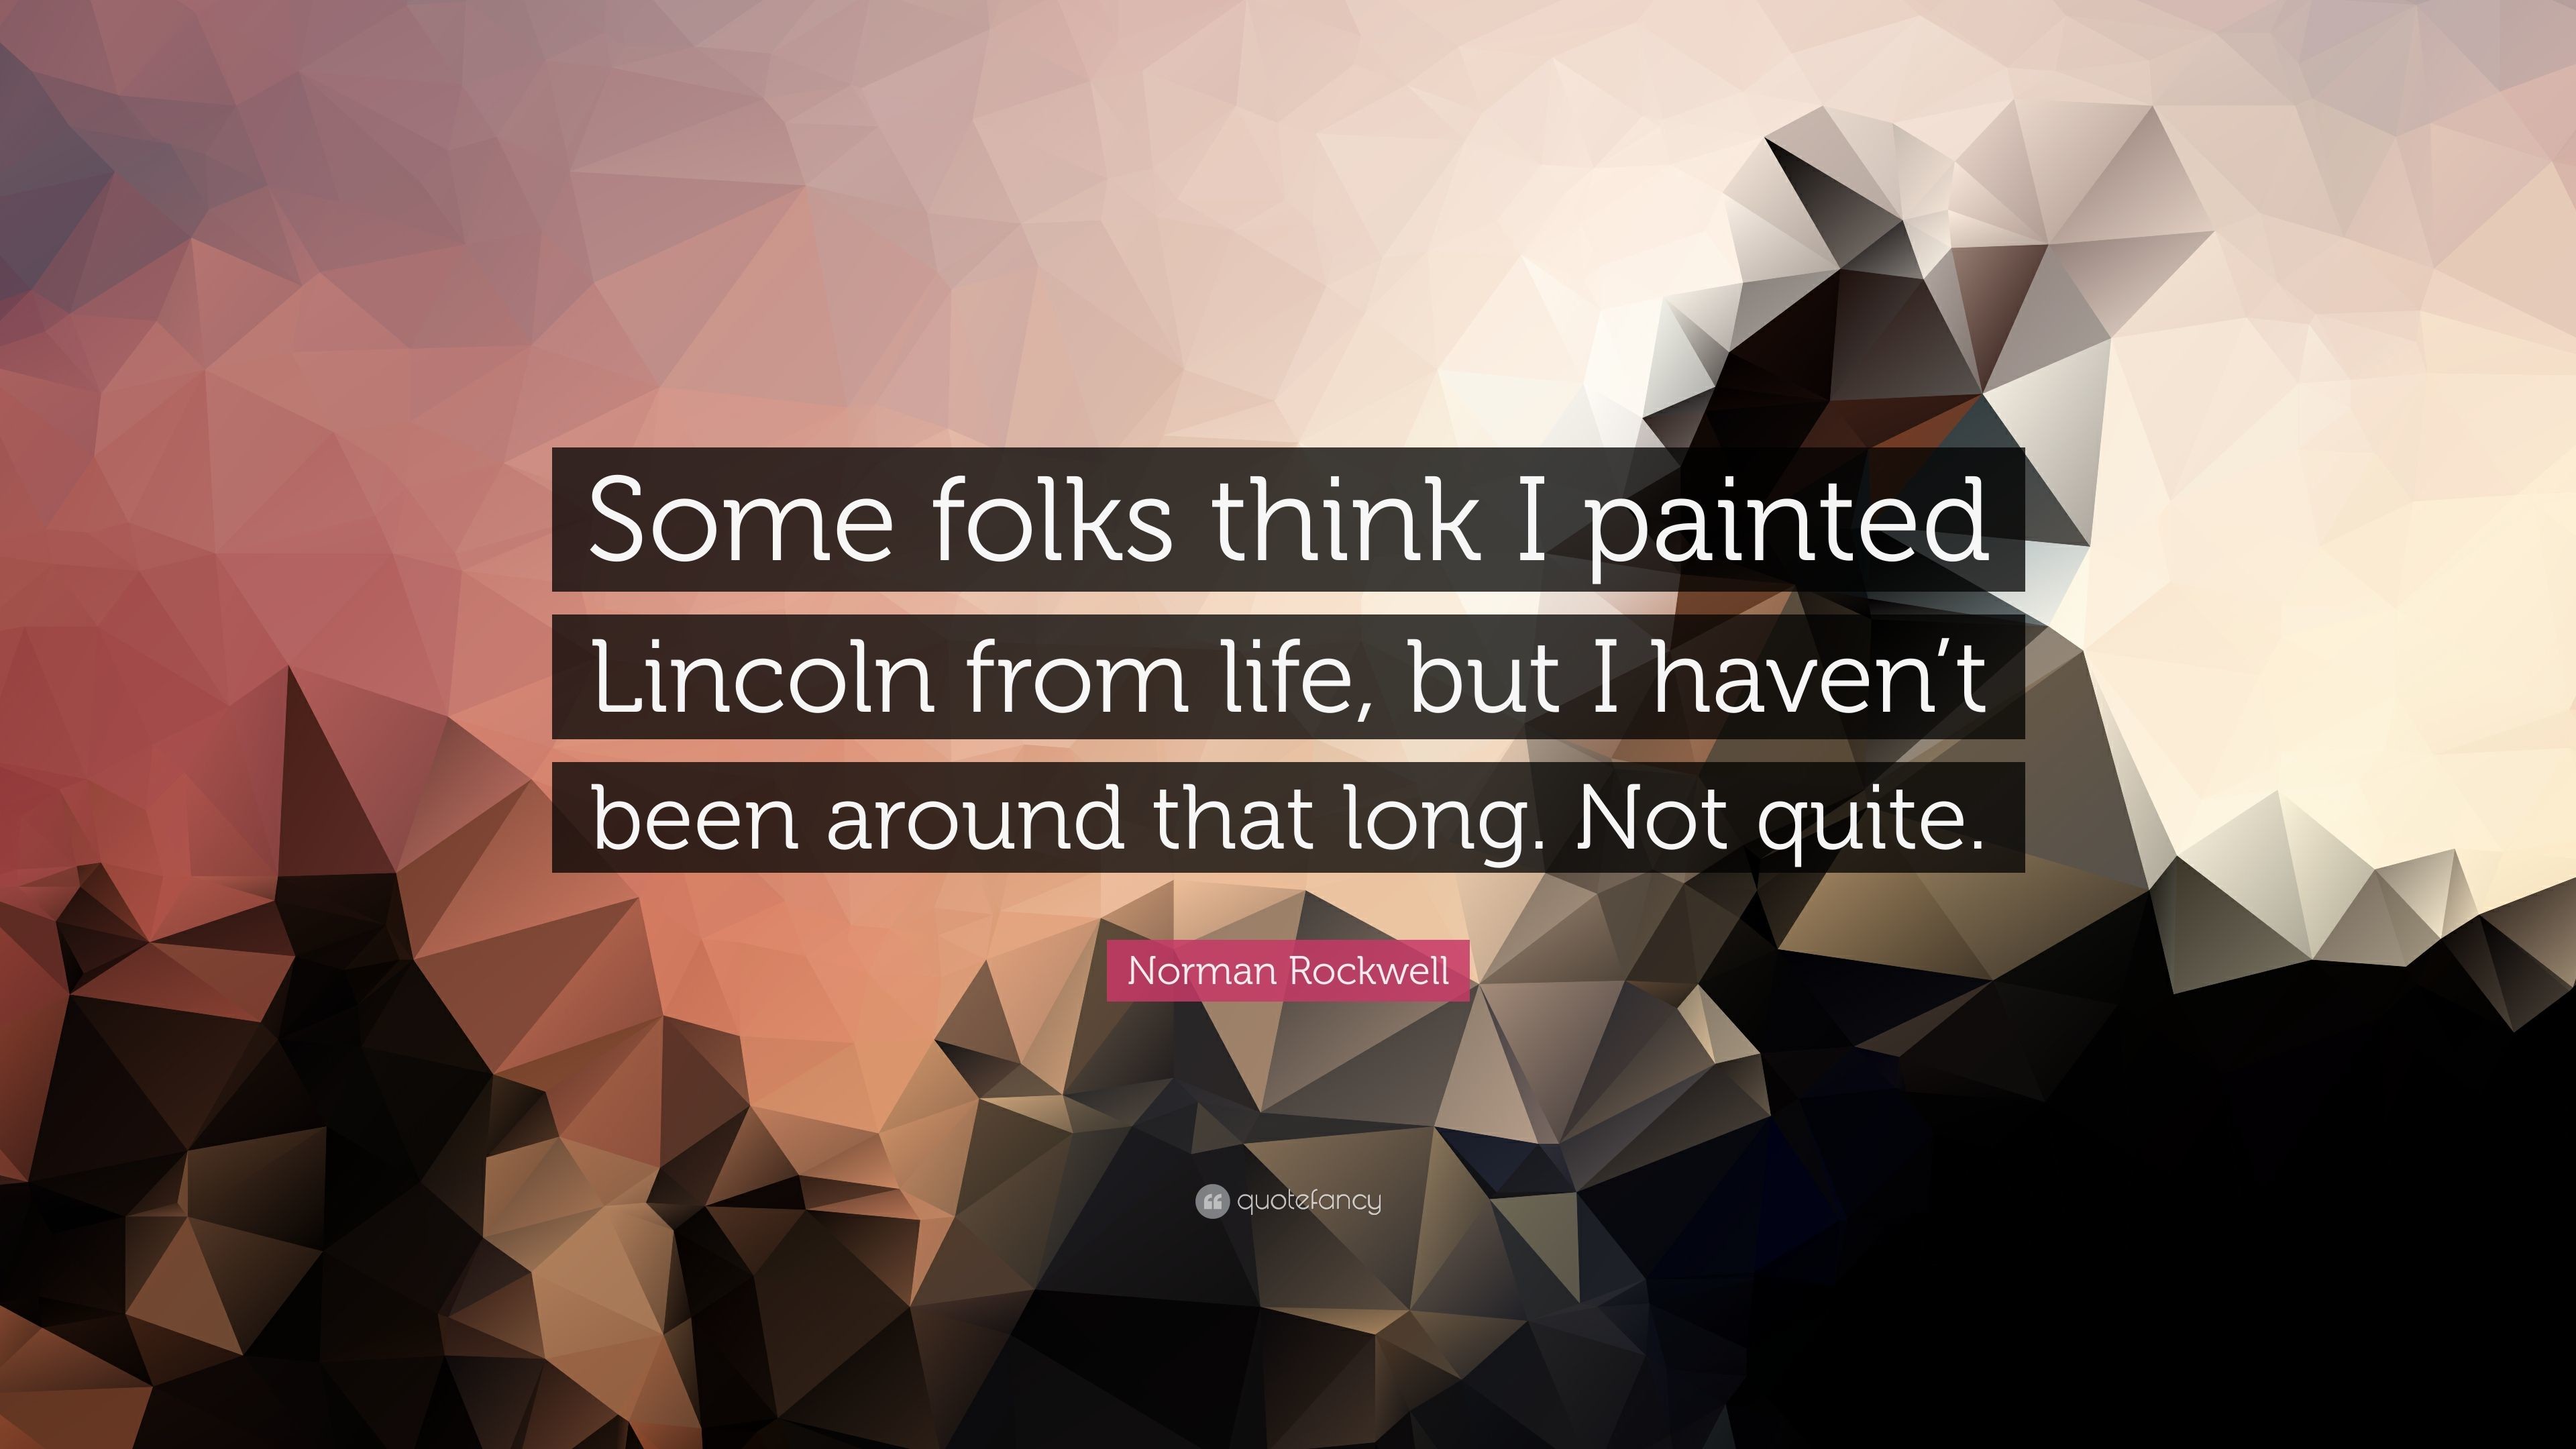 3840x2160 Norman Rockwell Quote: “Some folks think I painted Lincoln from life, but I